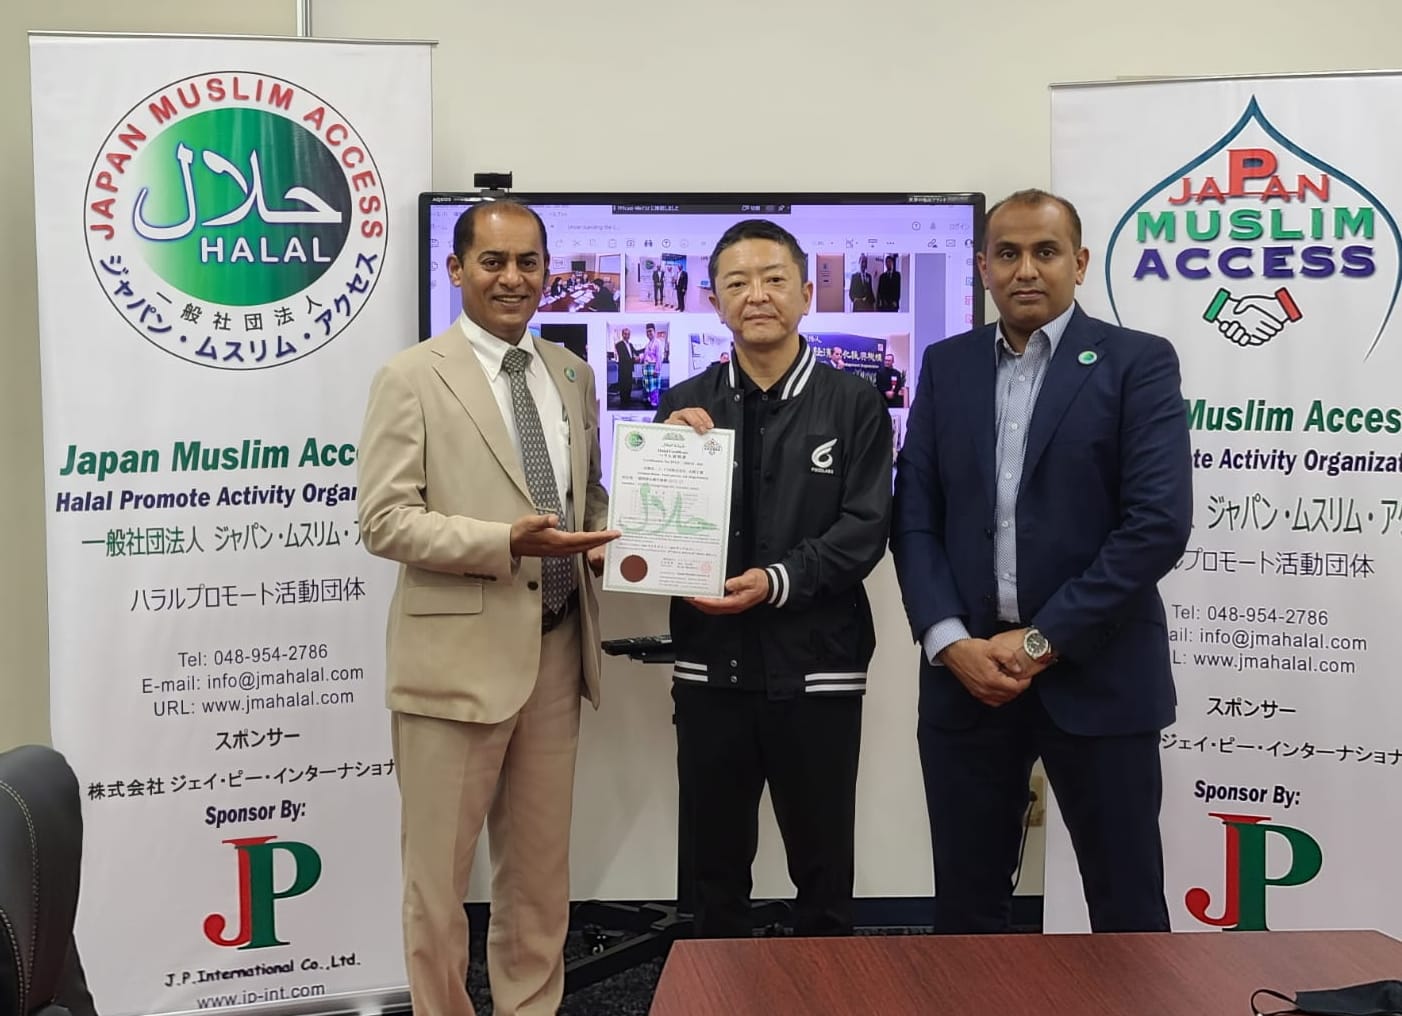 We renewed the halal certificate for the first time to 